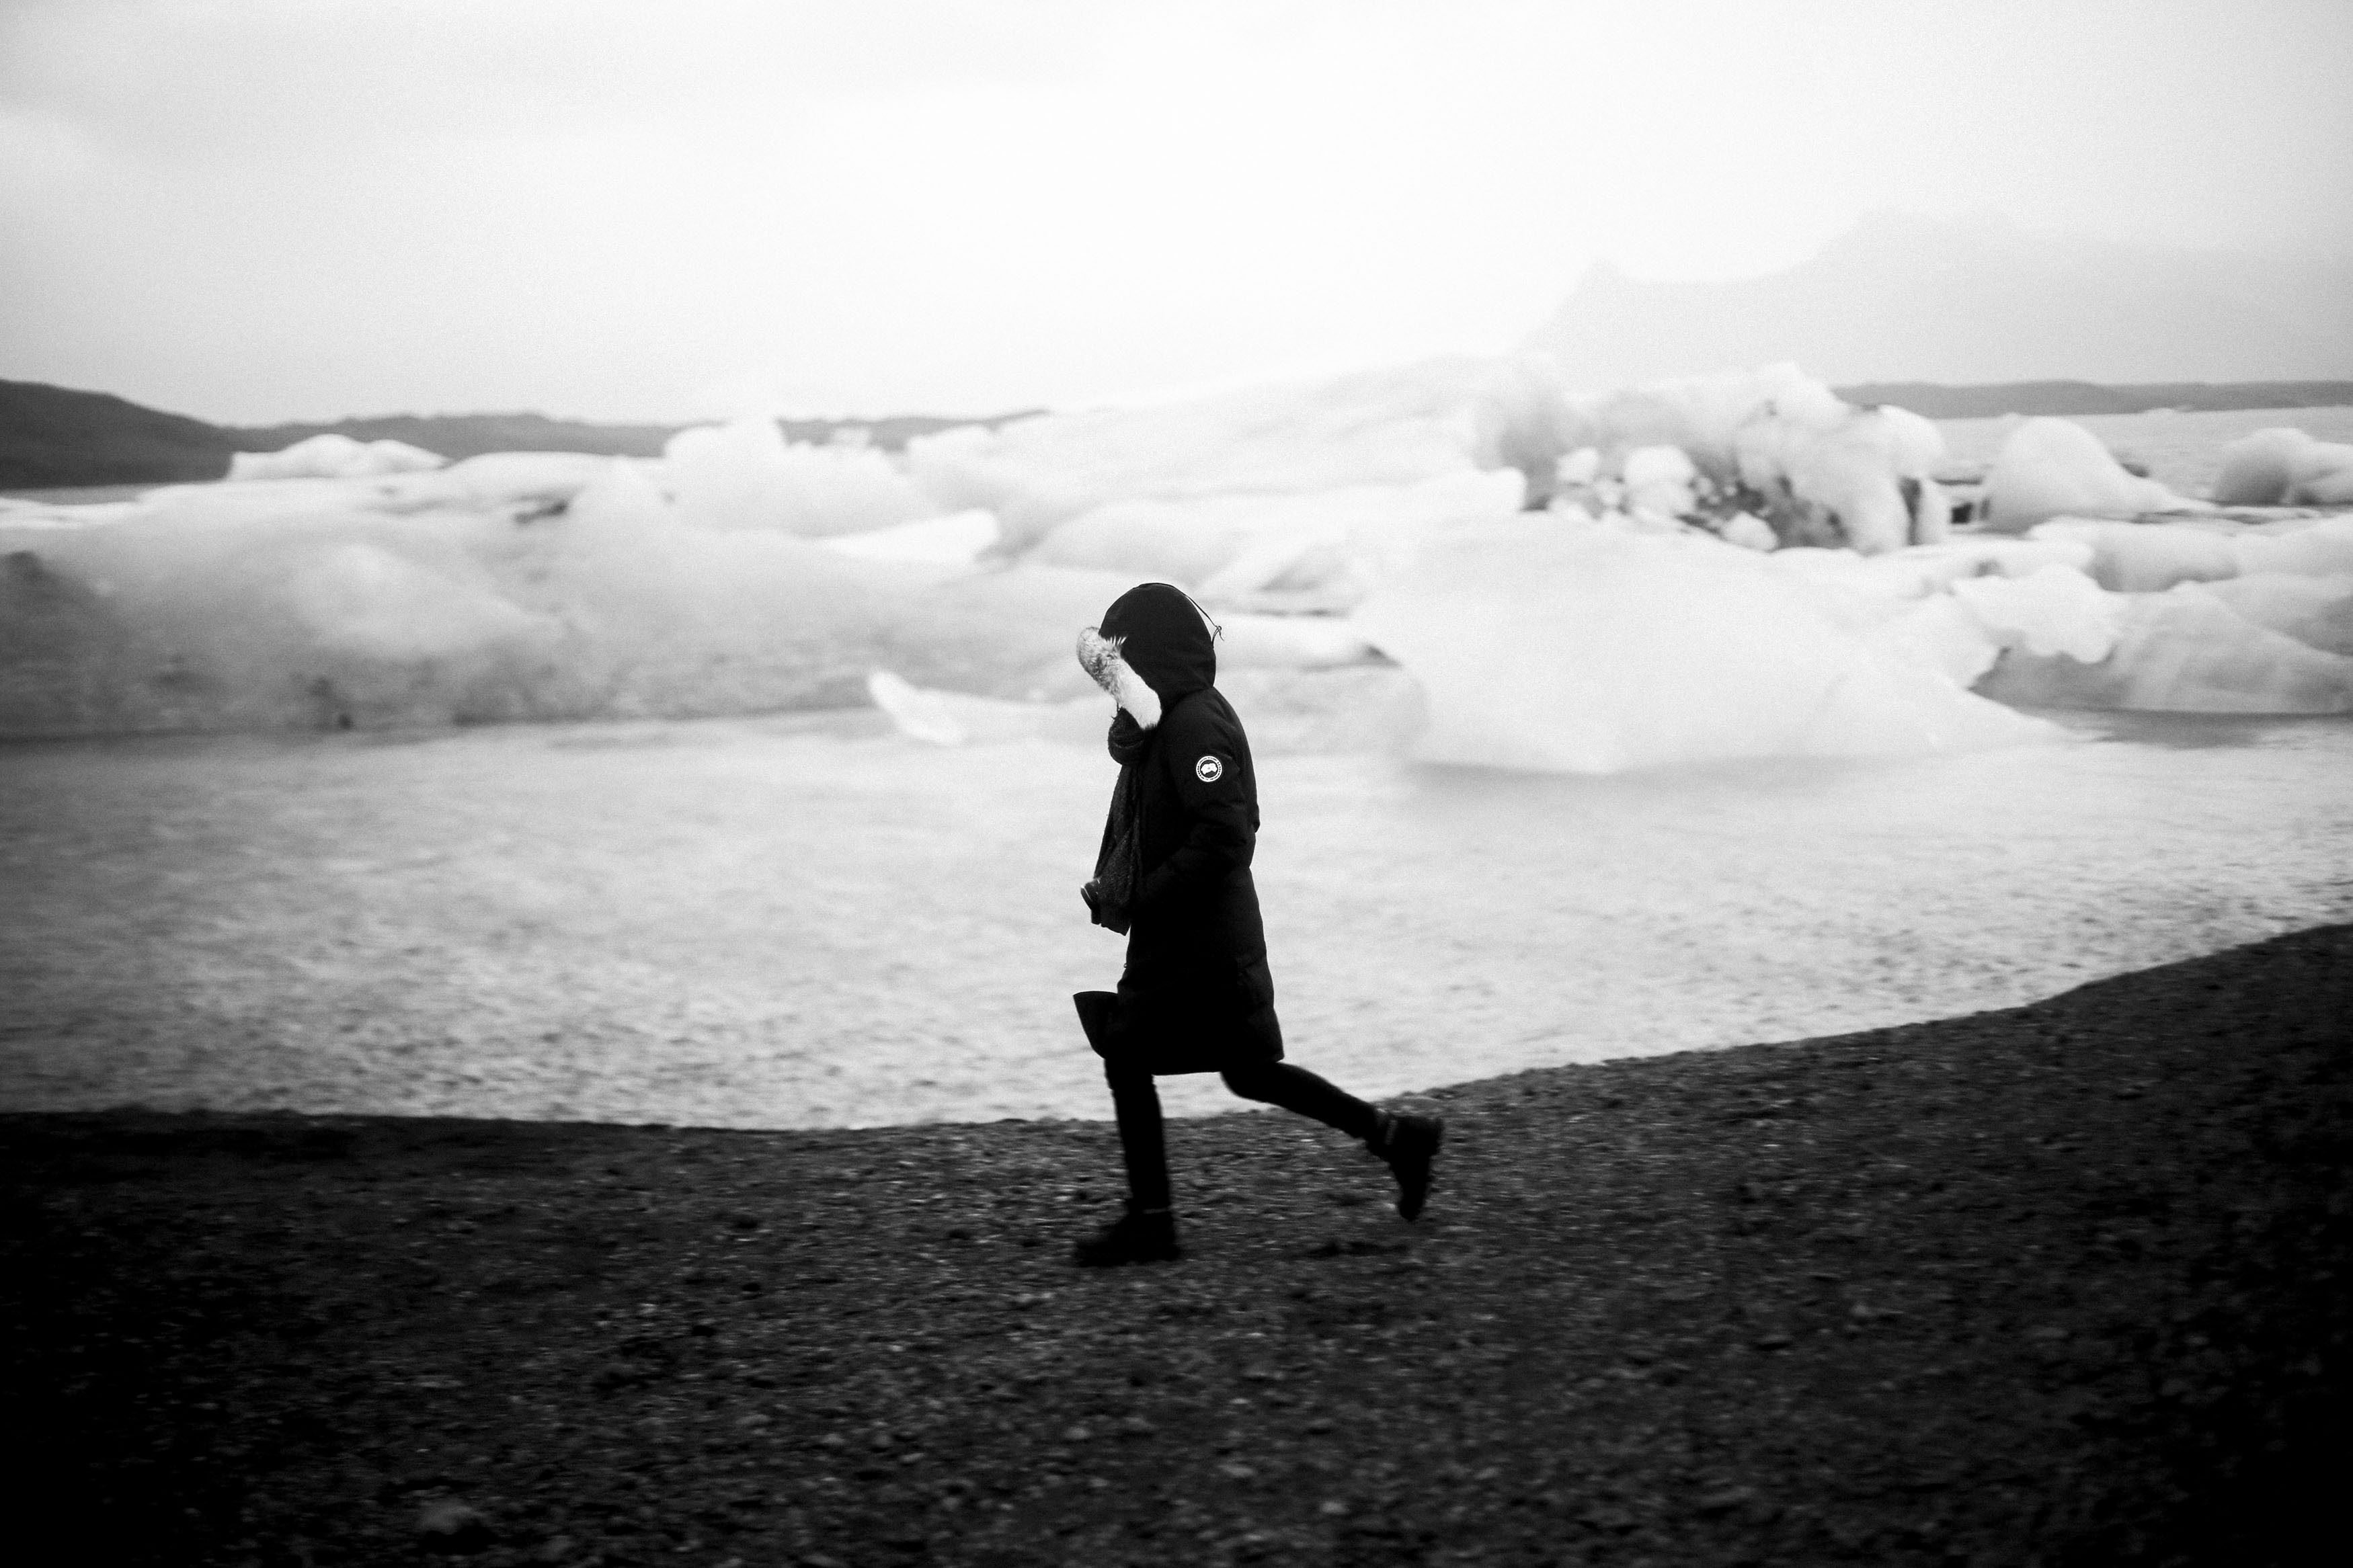 IHEARTALICE.DE - Fashion, Lifestyle & Travel-Blog from Berlin/Germany by Alice M. Huynh: Travel Diary with Black Canada Goose Kensington Parka & CAT Footwear at Jökusarlon/Iceland / Iceland Glacier / Travel-Diary